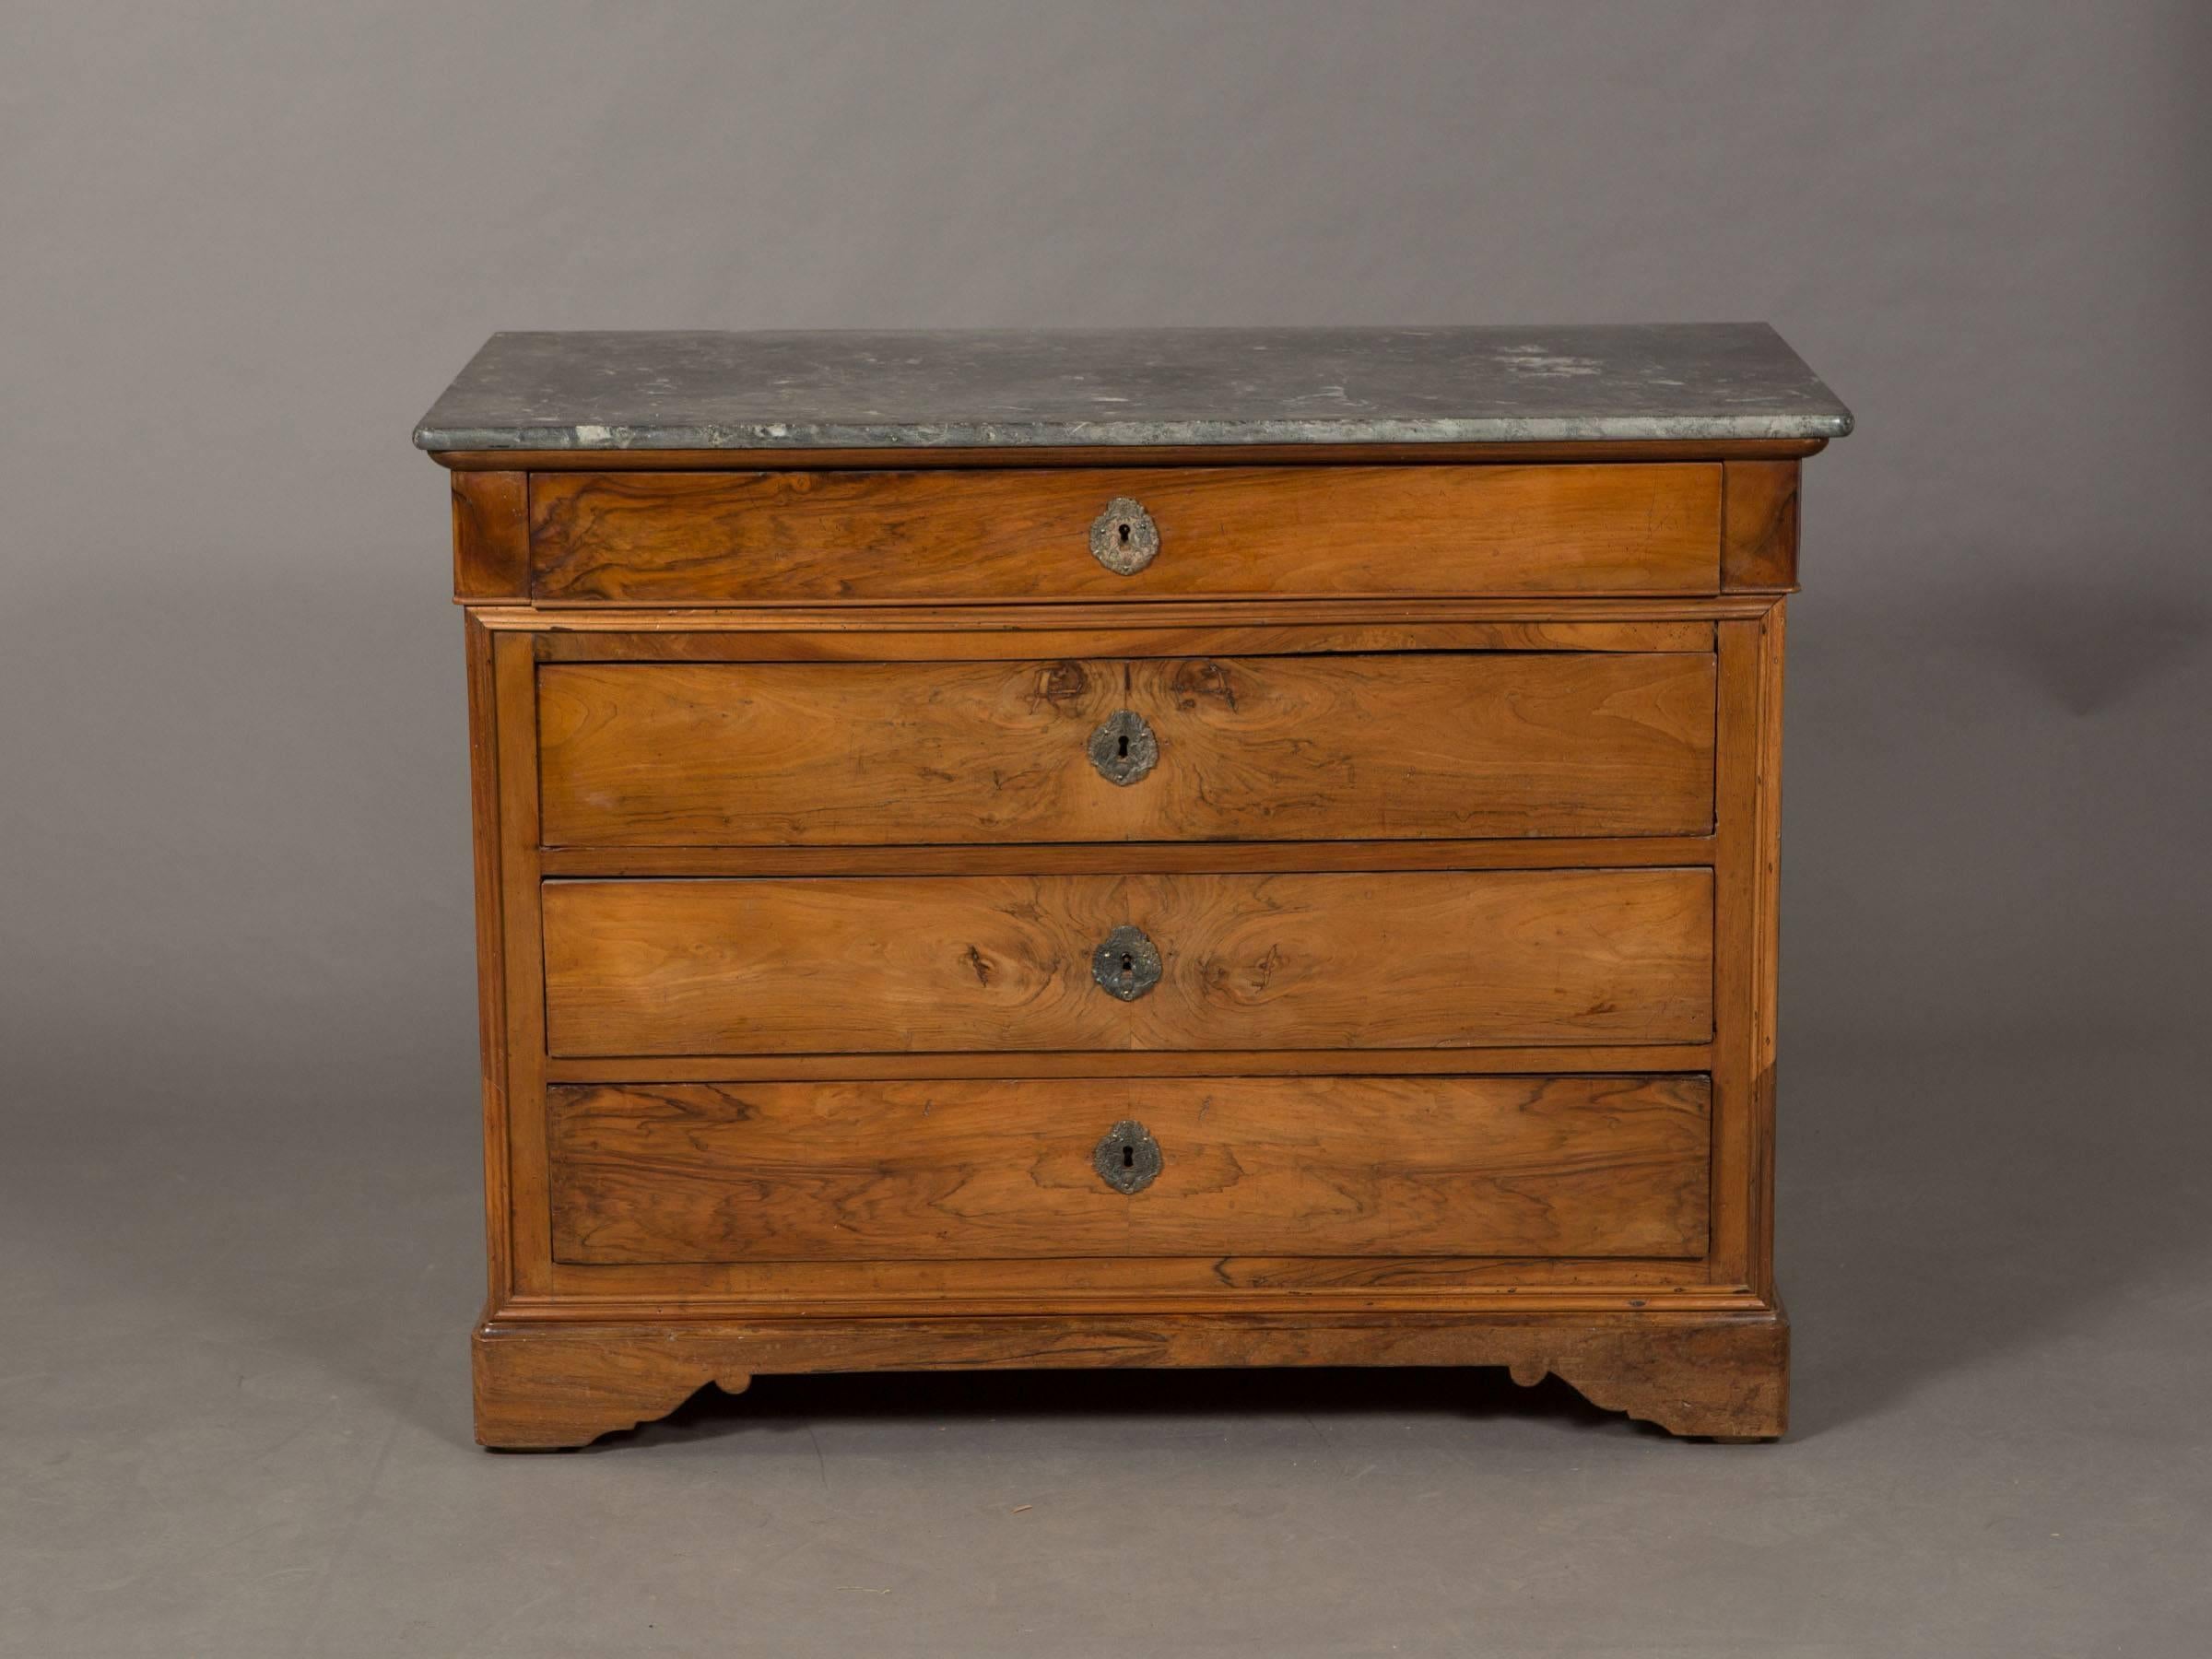 Charles X four-drawer elm commode with keys marble top and trim detail.